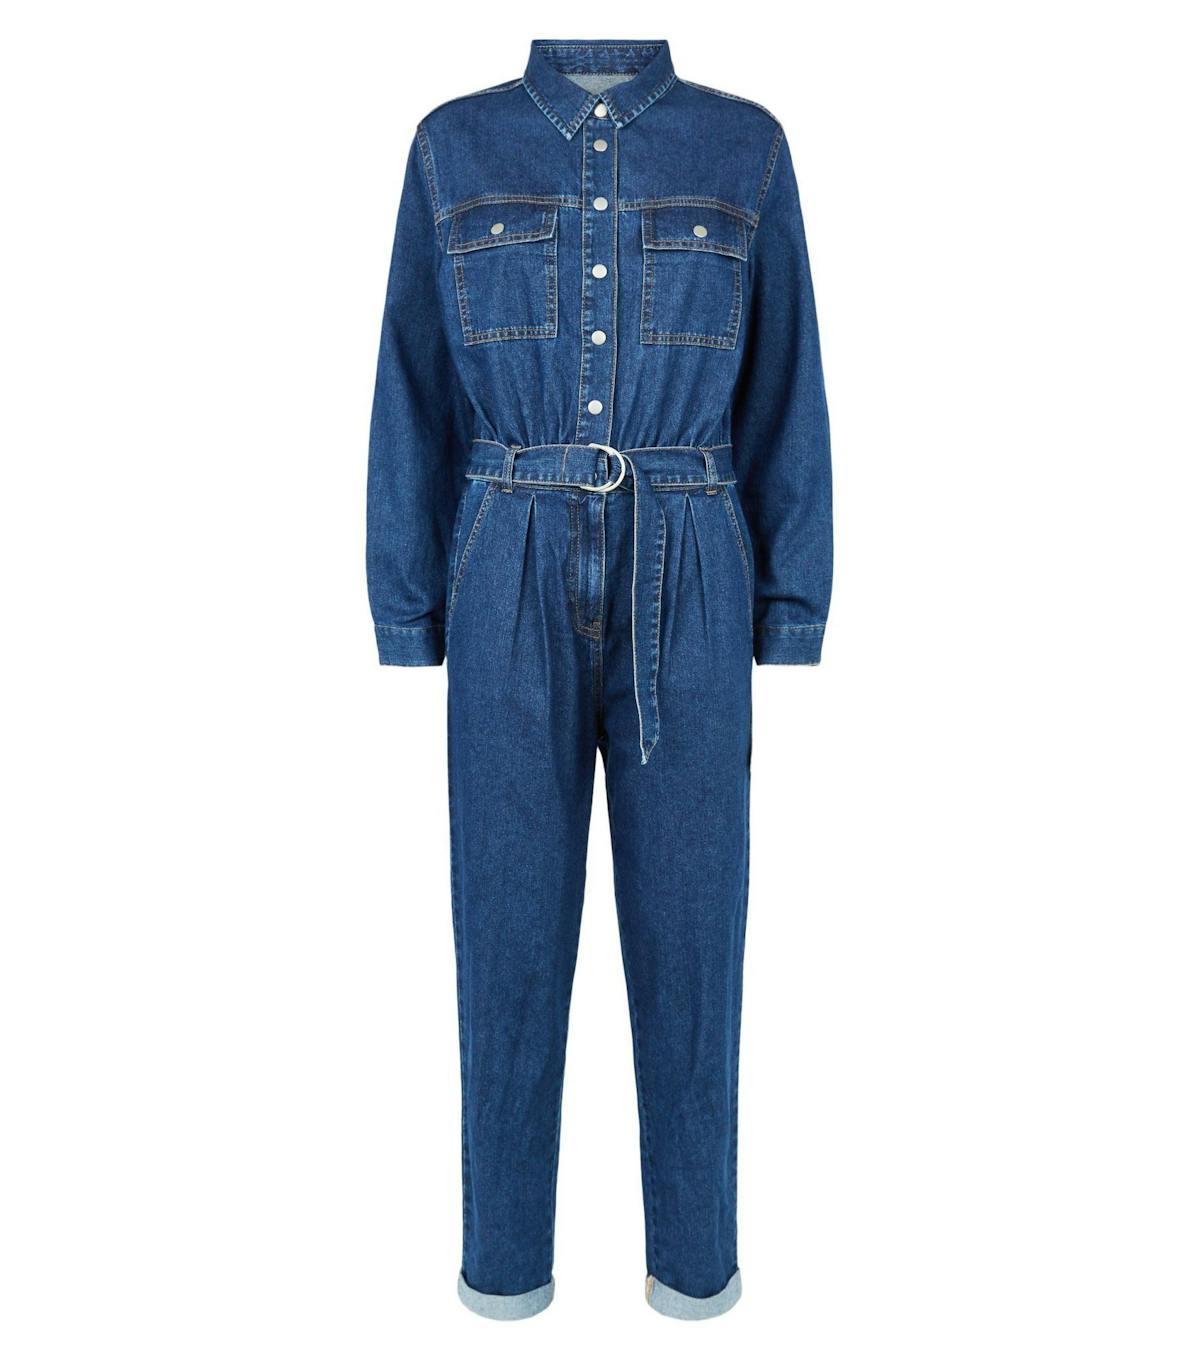 Best boiler suits to style for summer to autumn